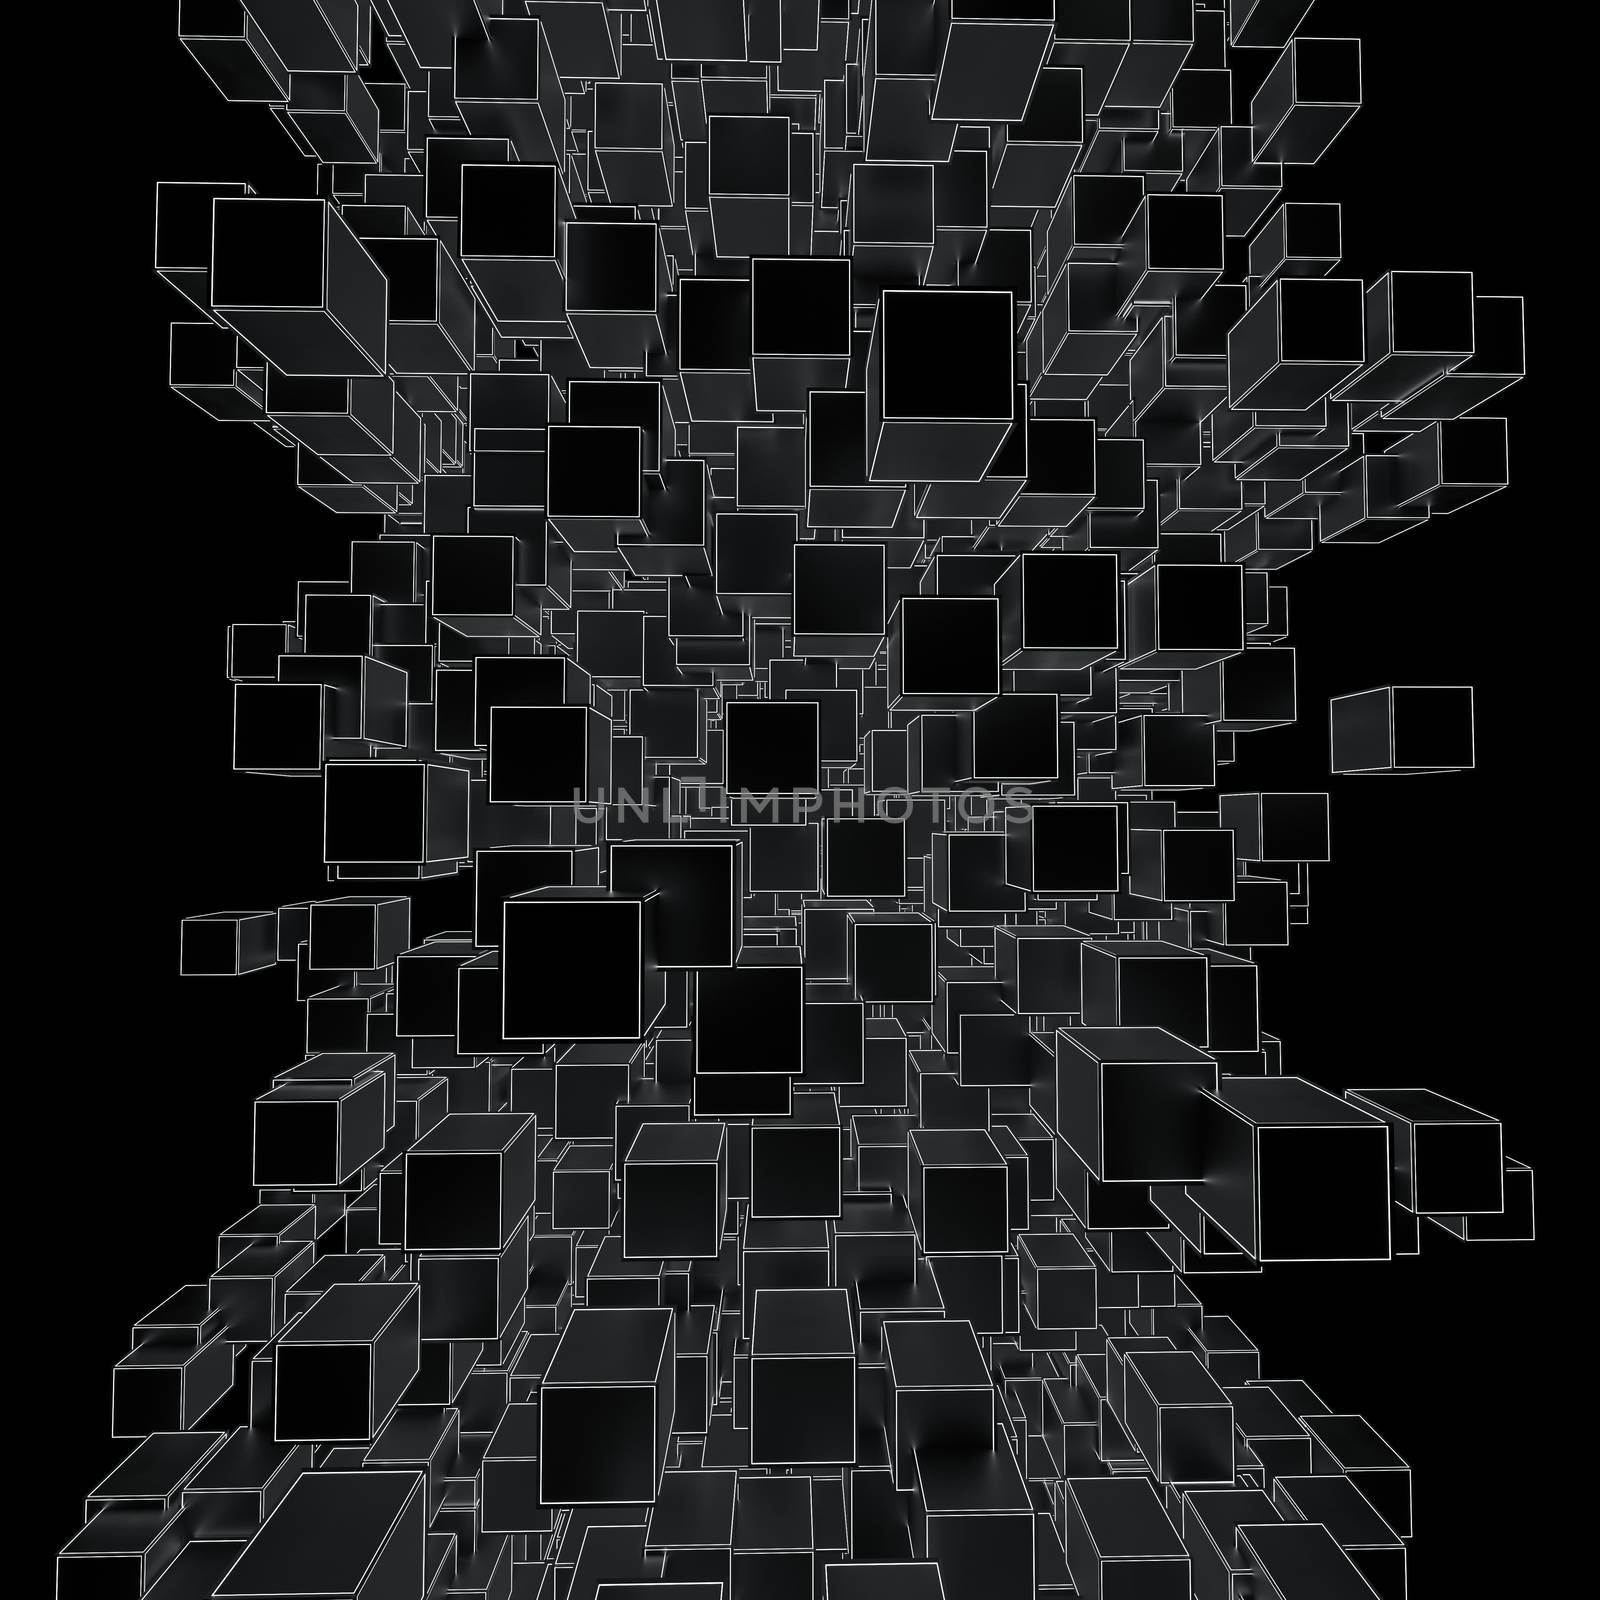 Abstract Futuristic Background Of Black Cubes with White Squares. 3D Illustration